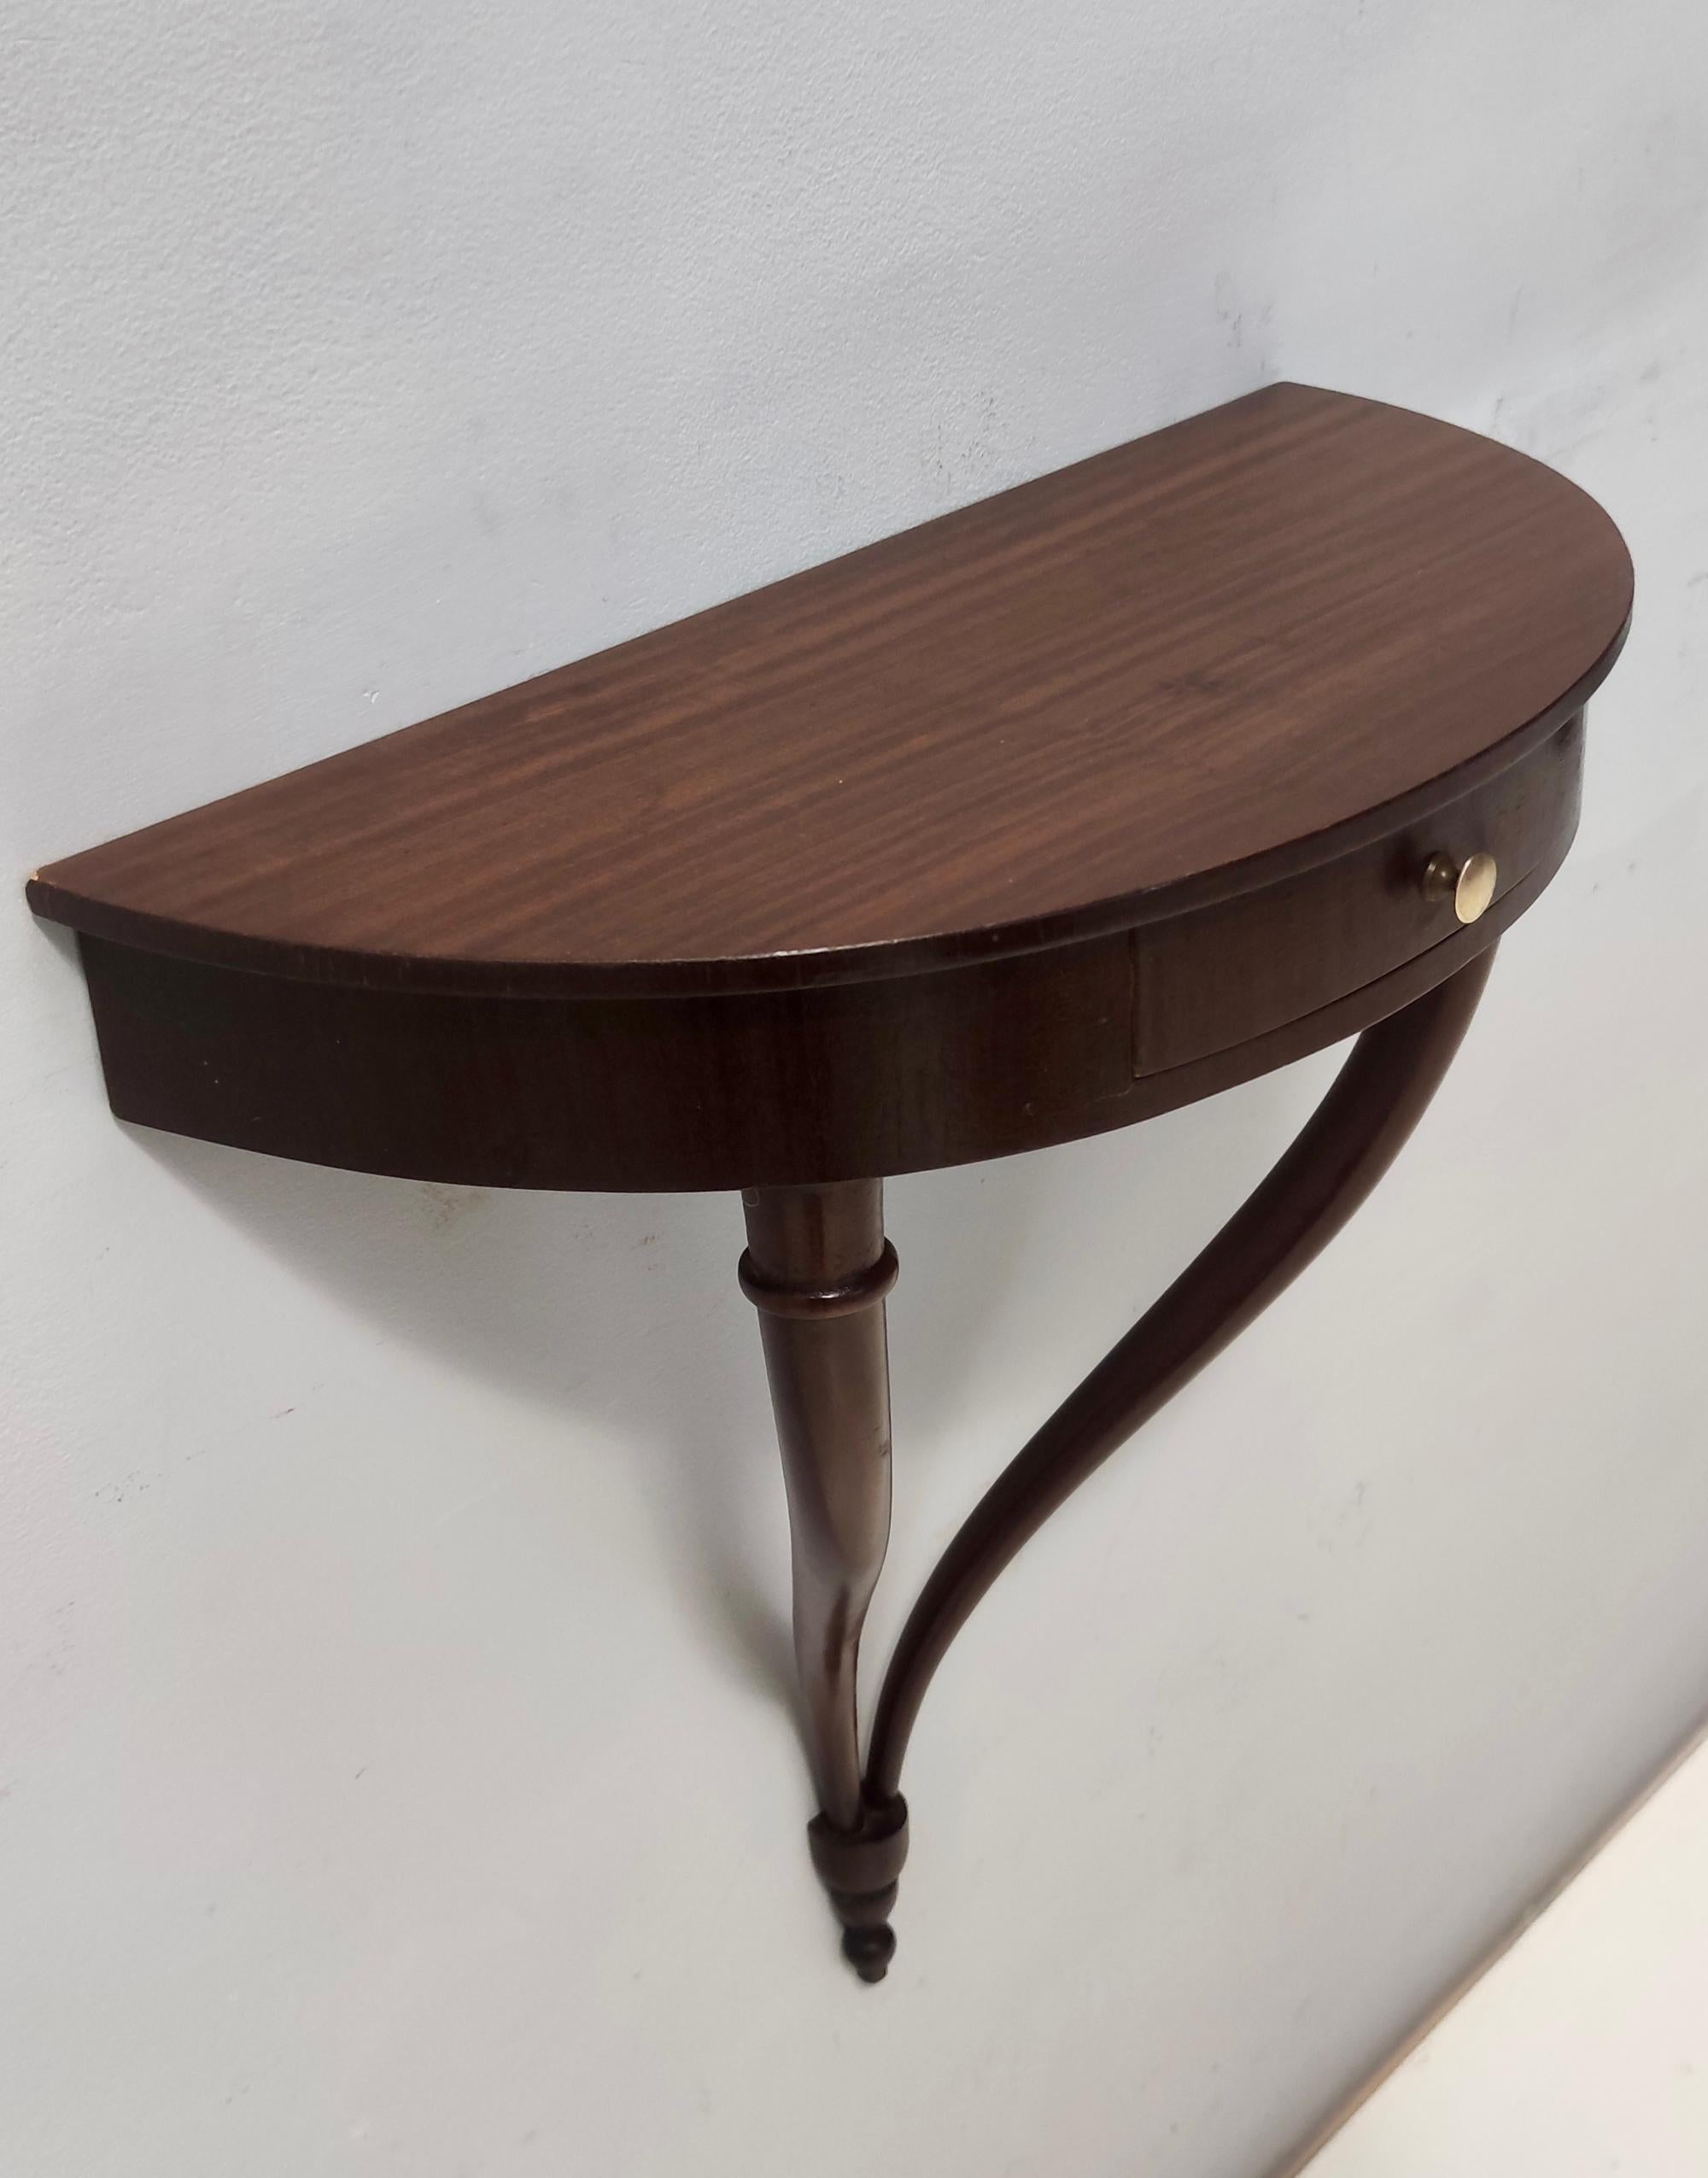 Mid-20th Century Beech Wall-Mounted Console Table / Nightstand attr. to Guglielmo Ulrich, Italy